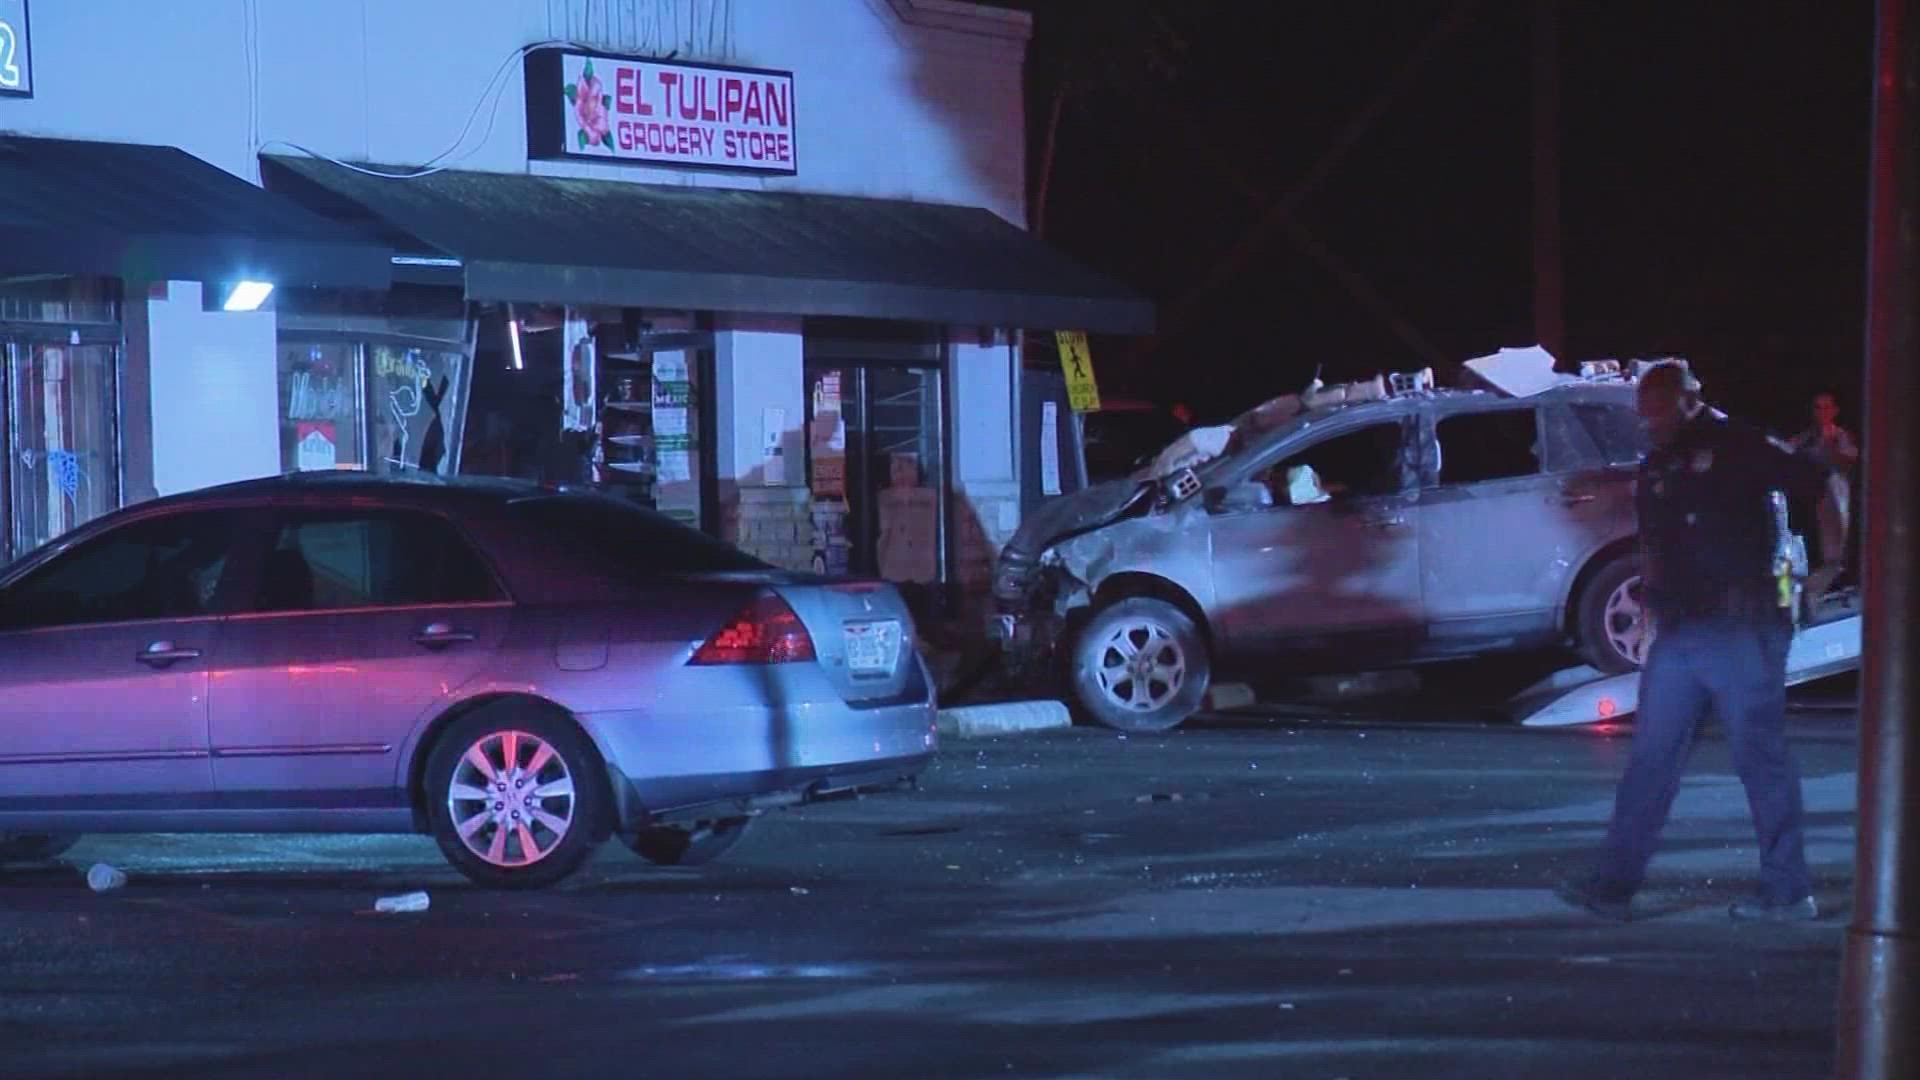 The crash happened at El Tulipan Grocery Store on East Livingston Avenue and South Nelson Road just before 2 a.m., according to Columbus police.